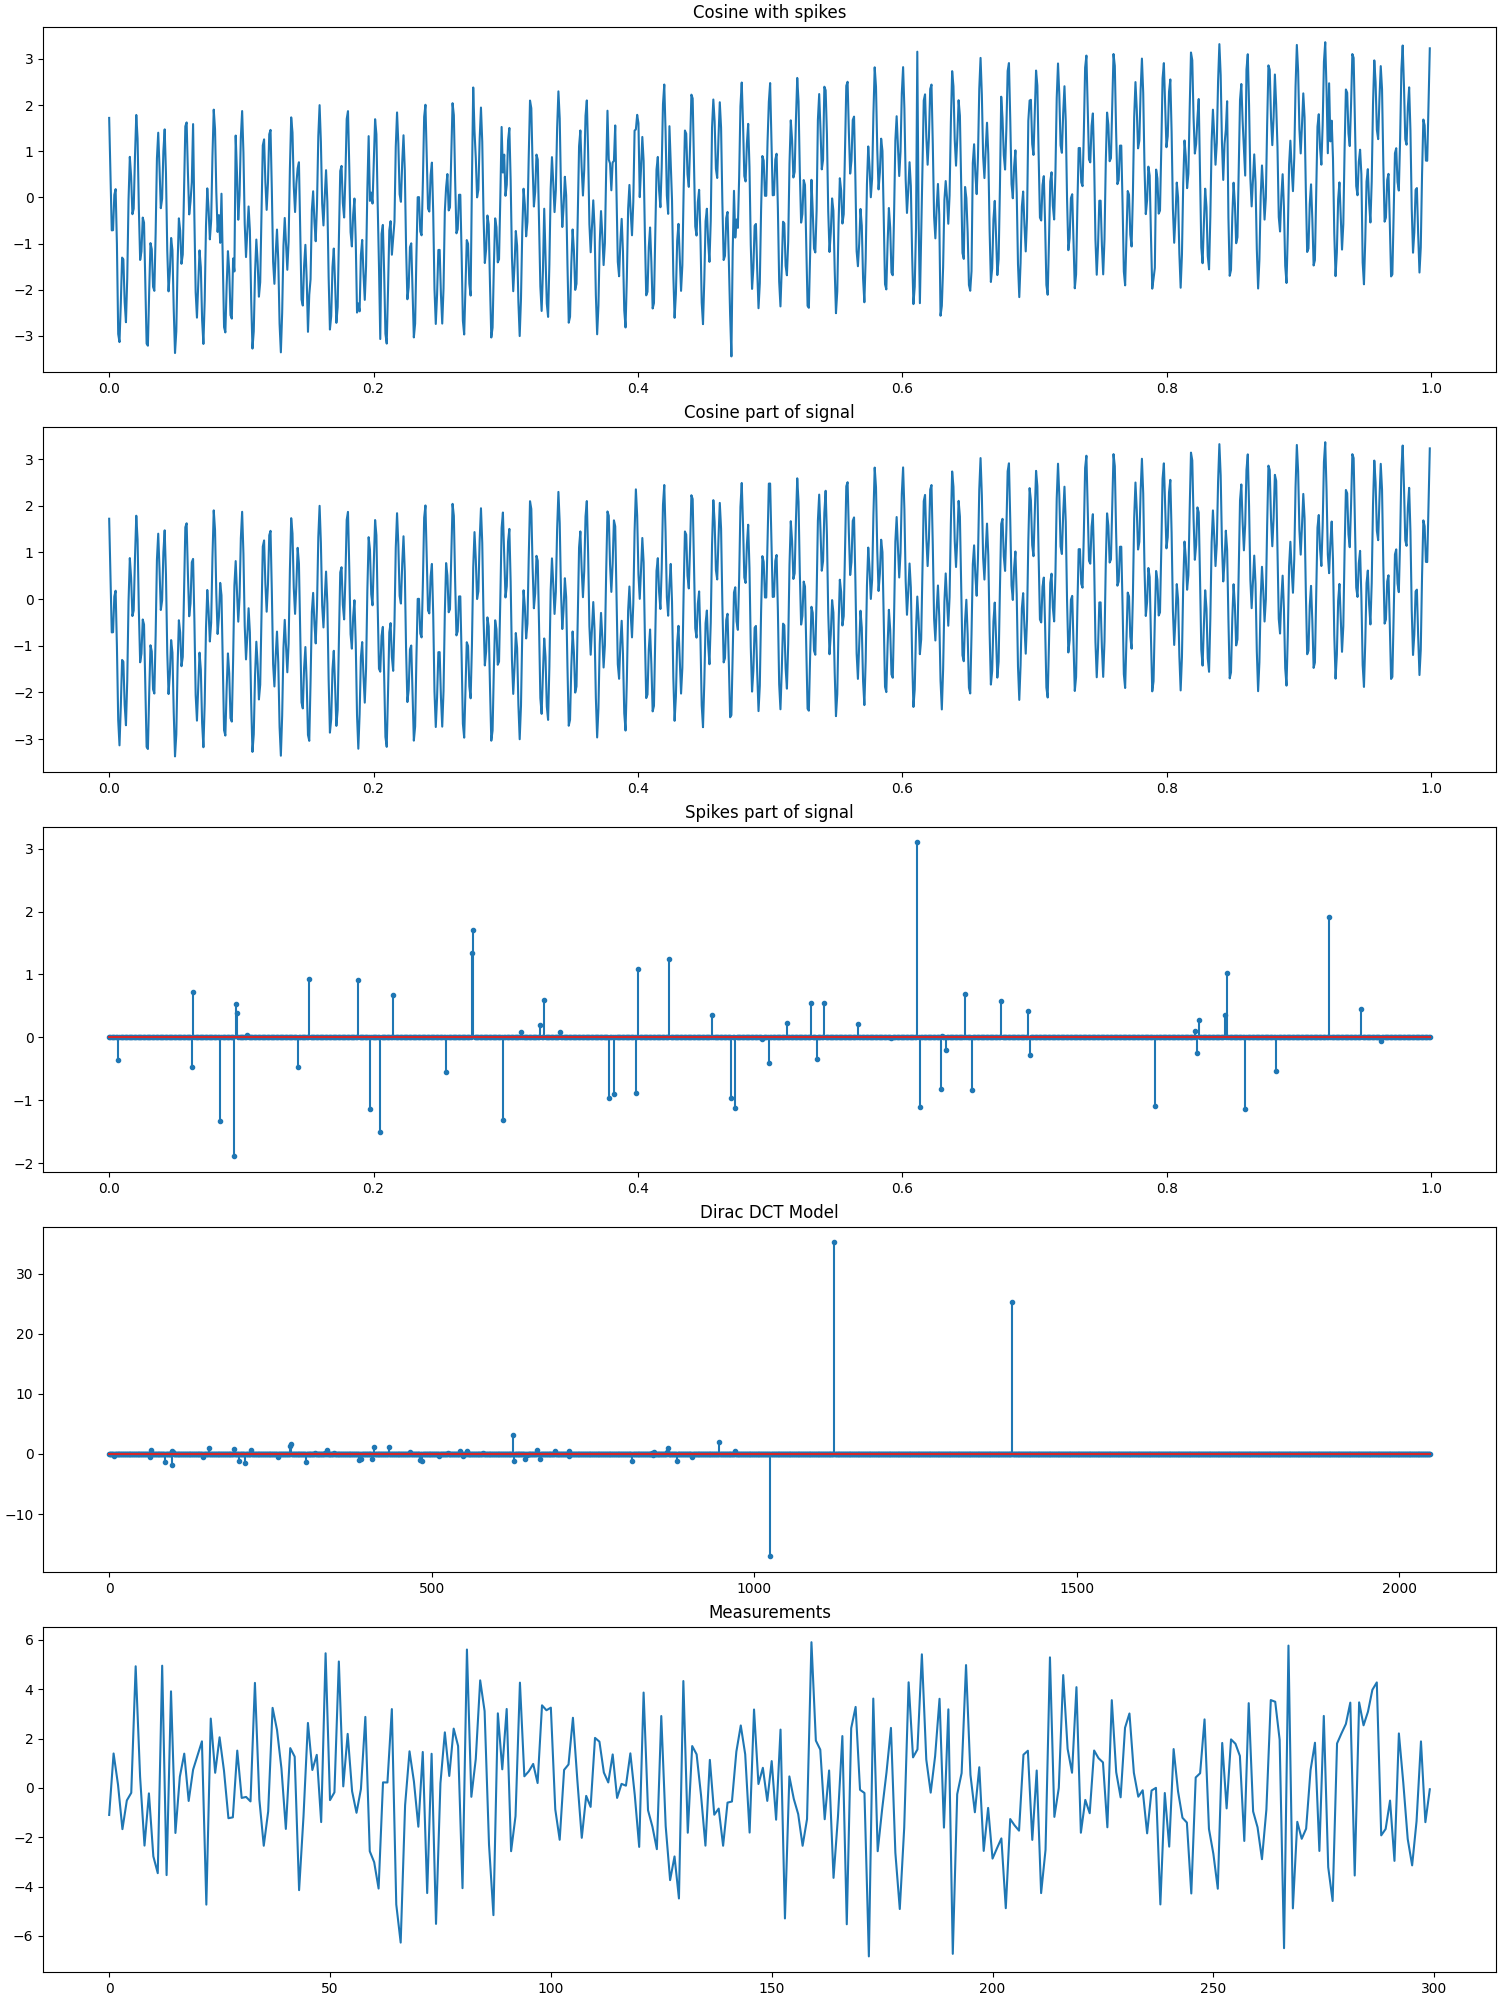 Cosine with spikes, Cosine part of signal, Spikes part of signal, Dirac DCT Model, Measurements